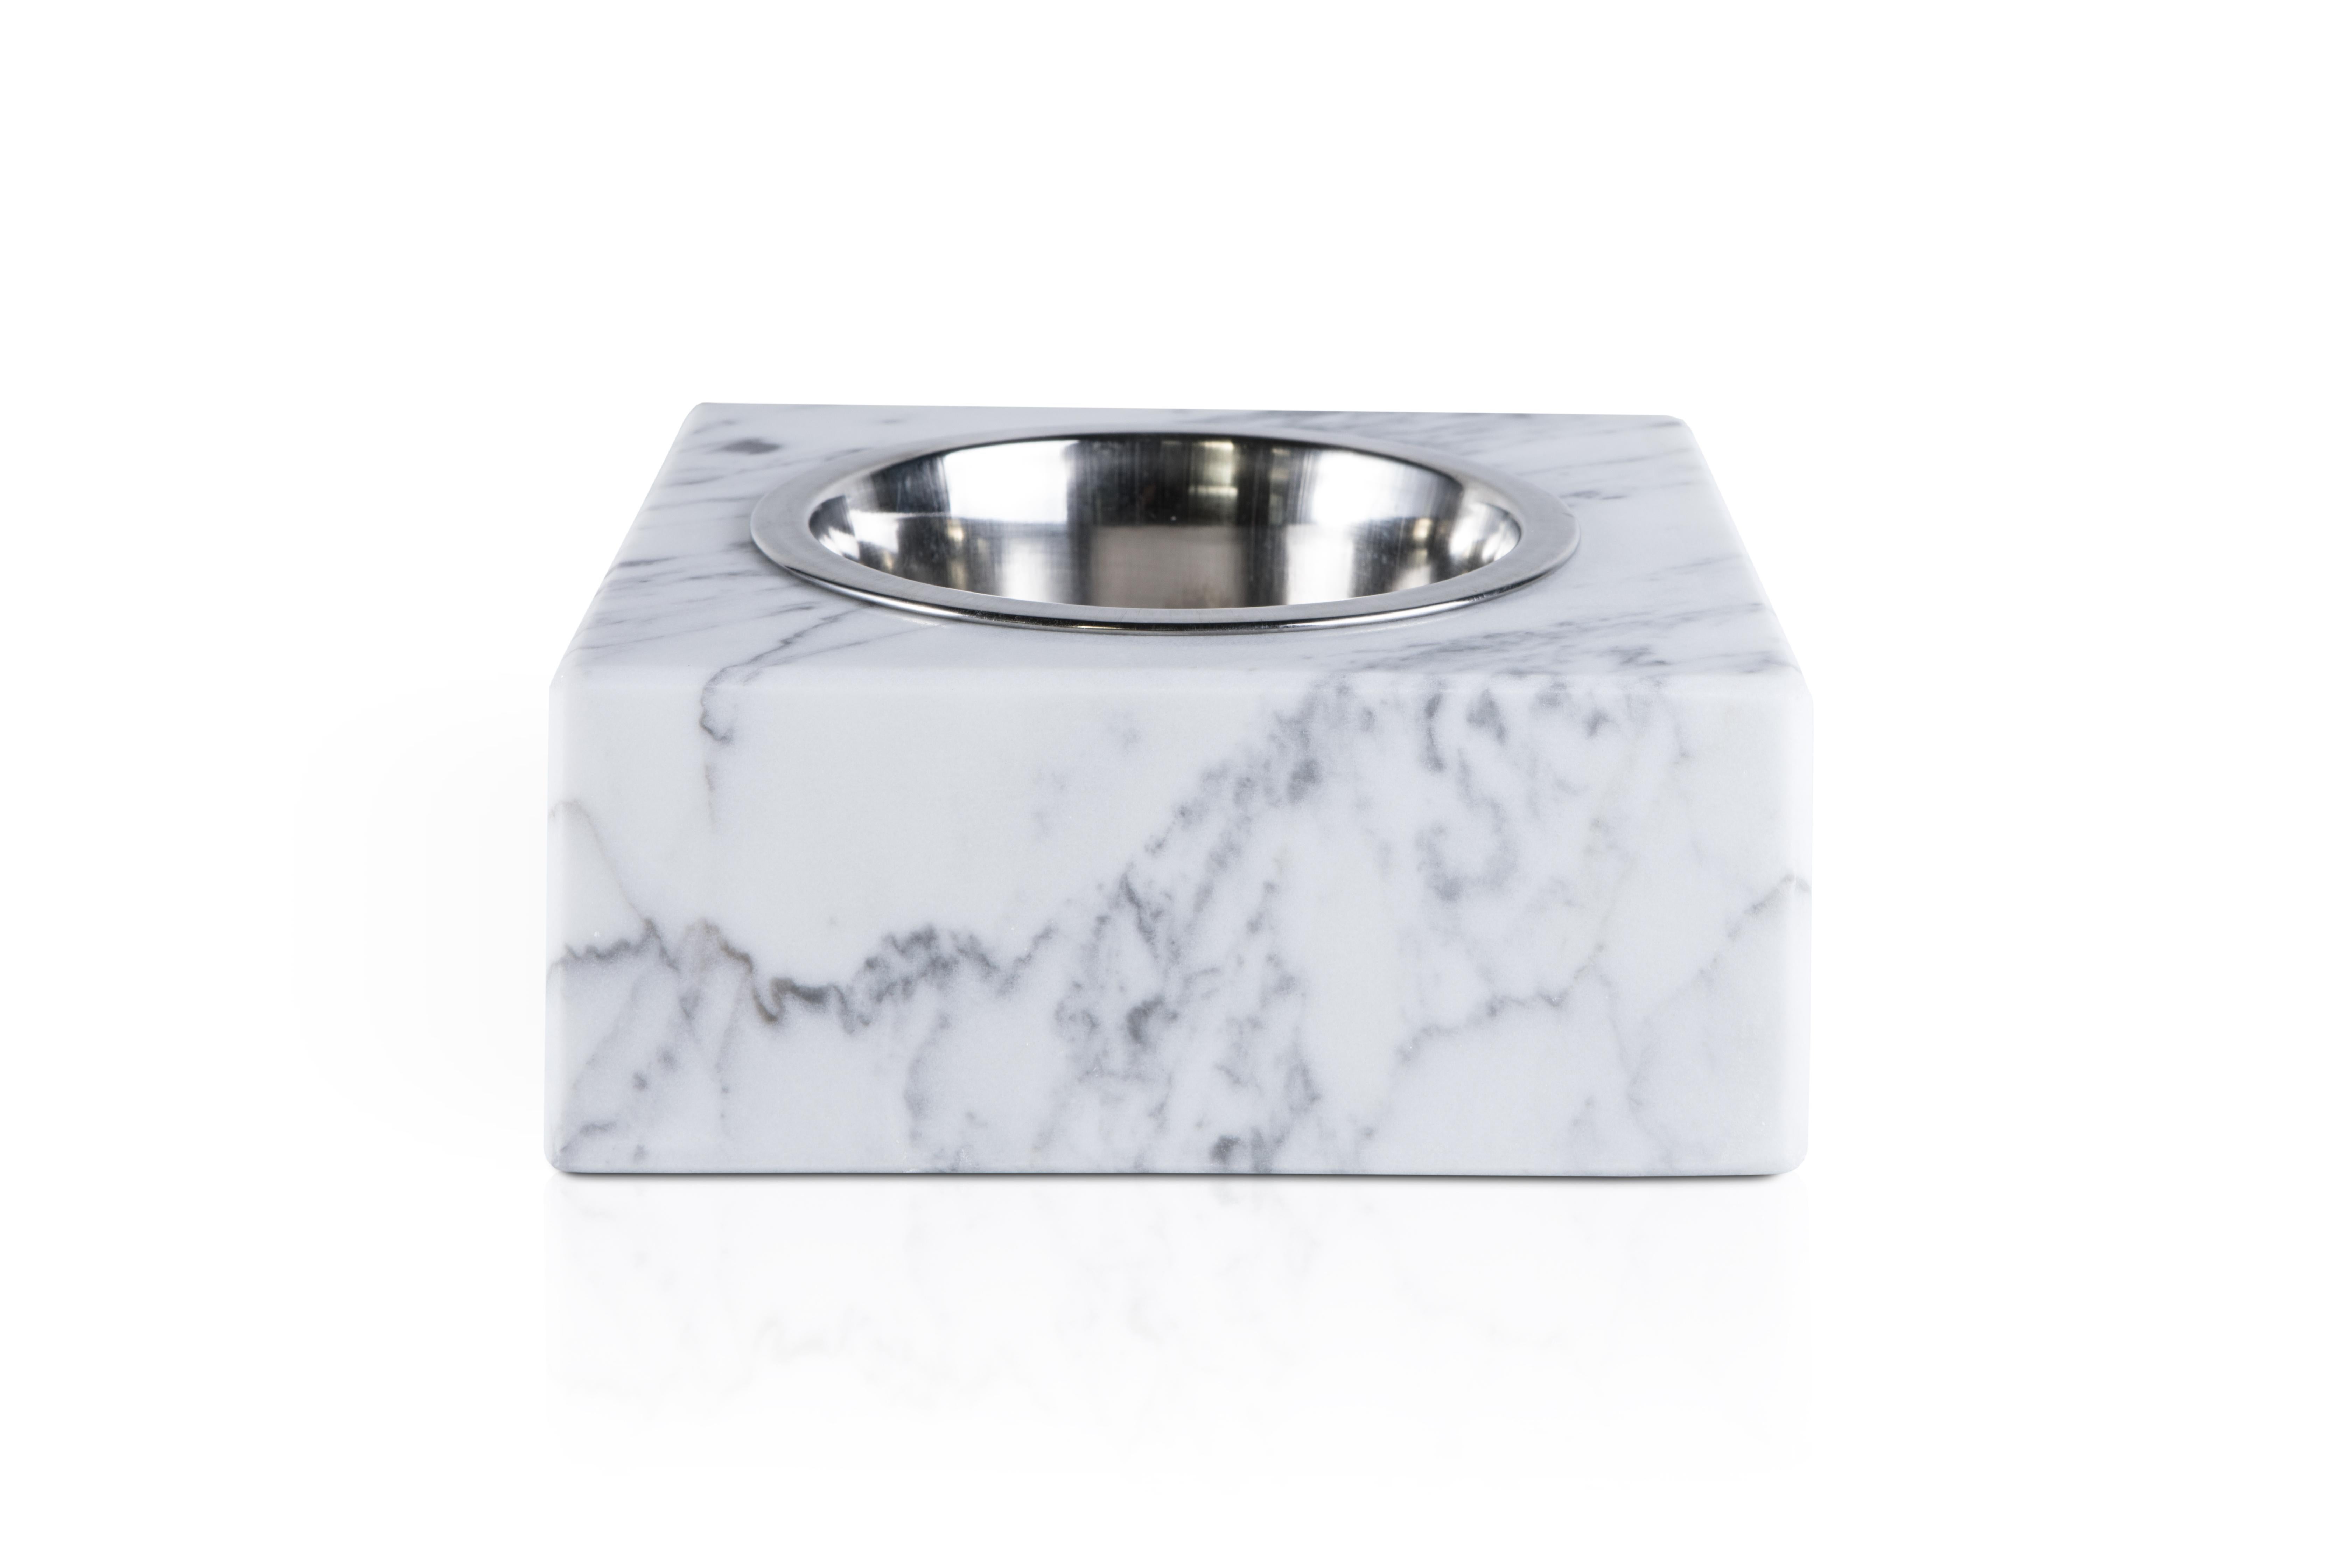 Squared white Carrara marble bowl for cats and dogs with removable stainless steel bowl, made in Italy, Carrara. Size medium.
Each piece is in a way unique (every marble block is different in veins and shades) and handmade by Italian artisans